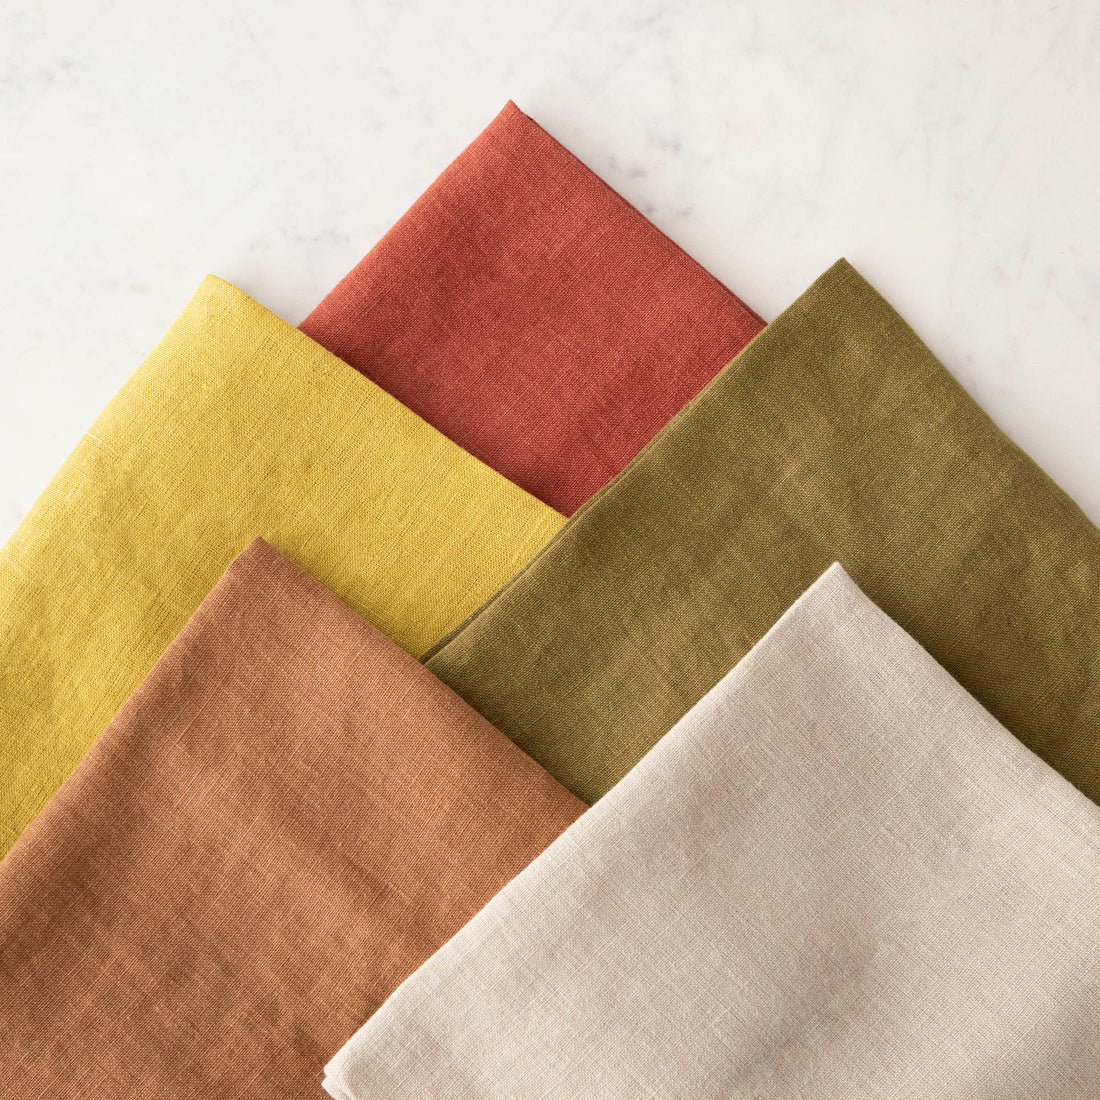 Four European Linen Napkin Collection in a variety of colors by Magic Linen.